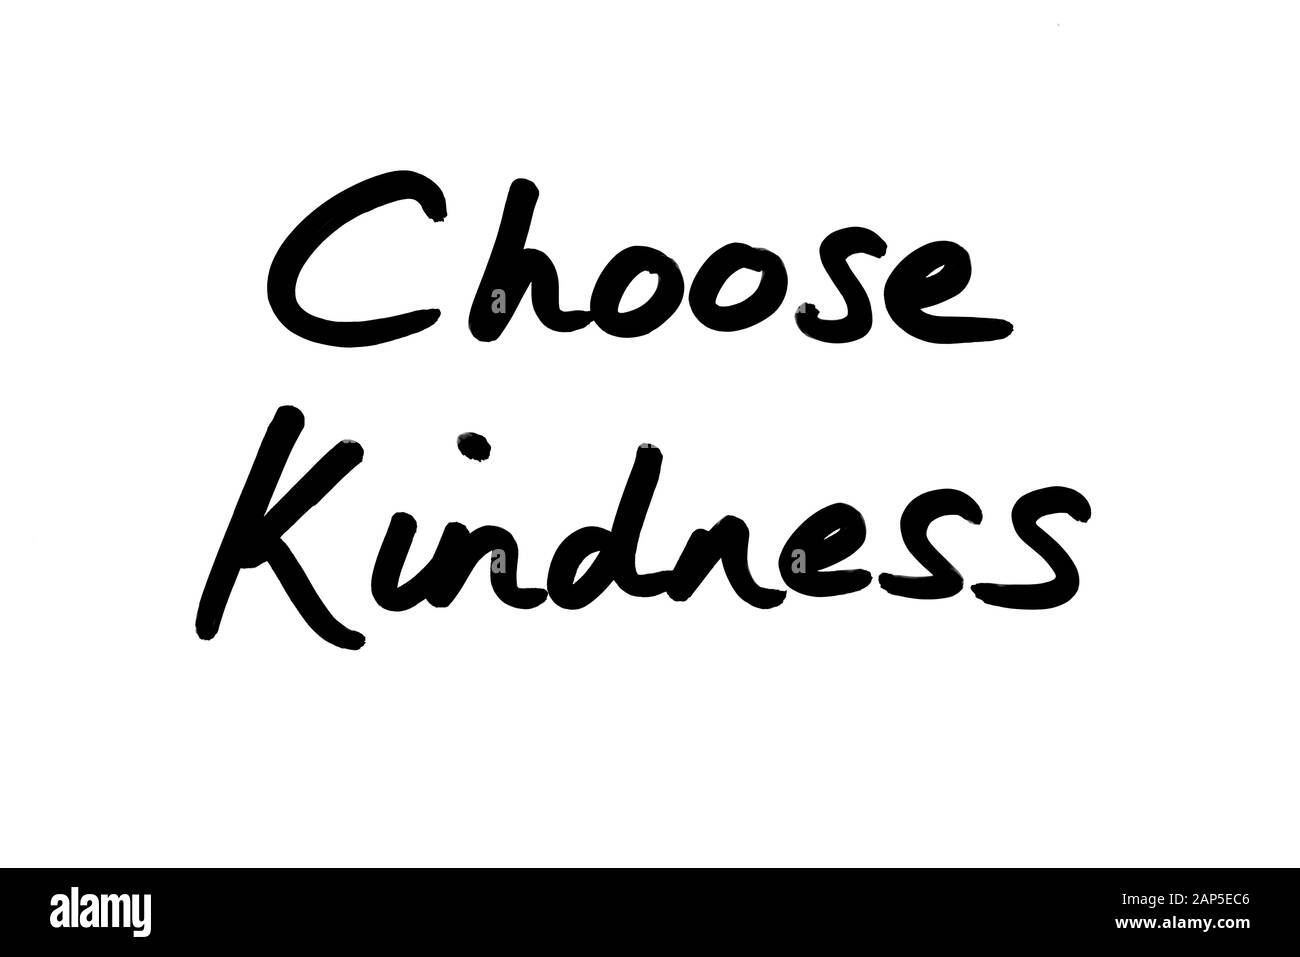 Choose Kindness handwritten over a white background. Stock Photo